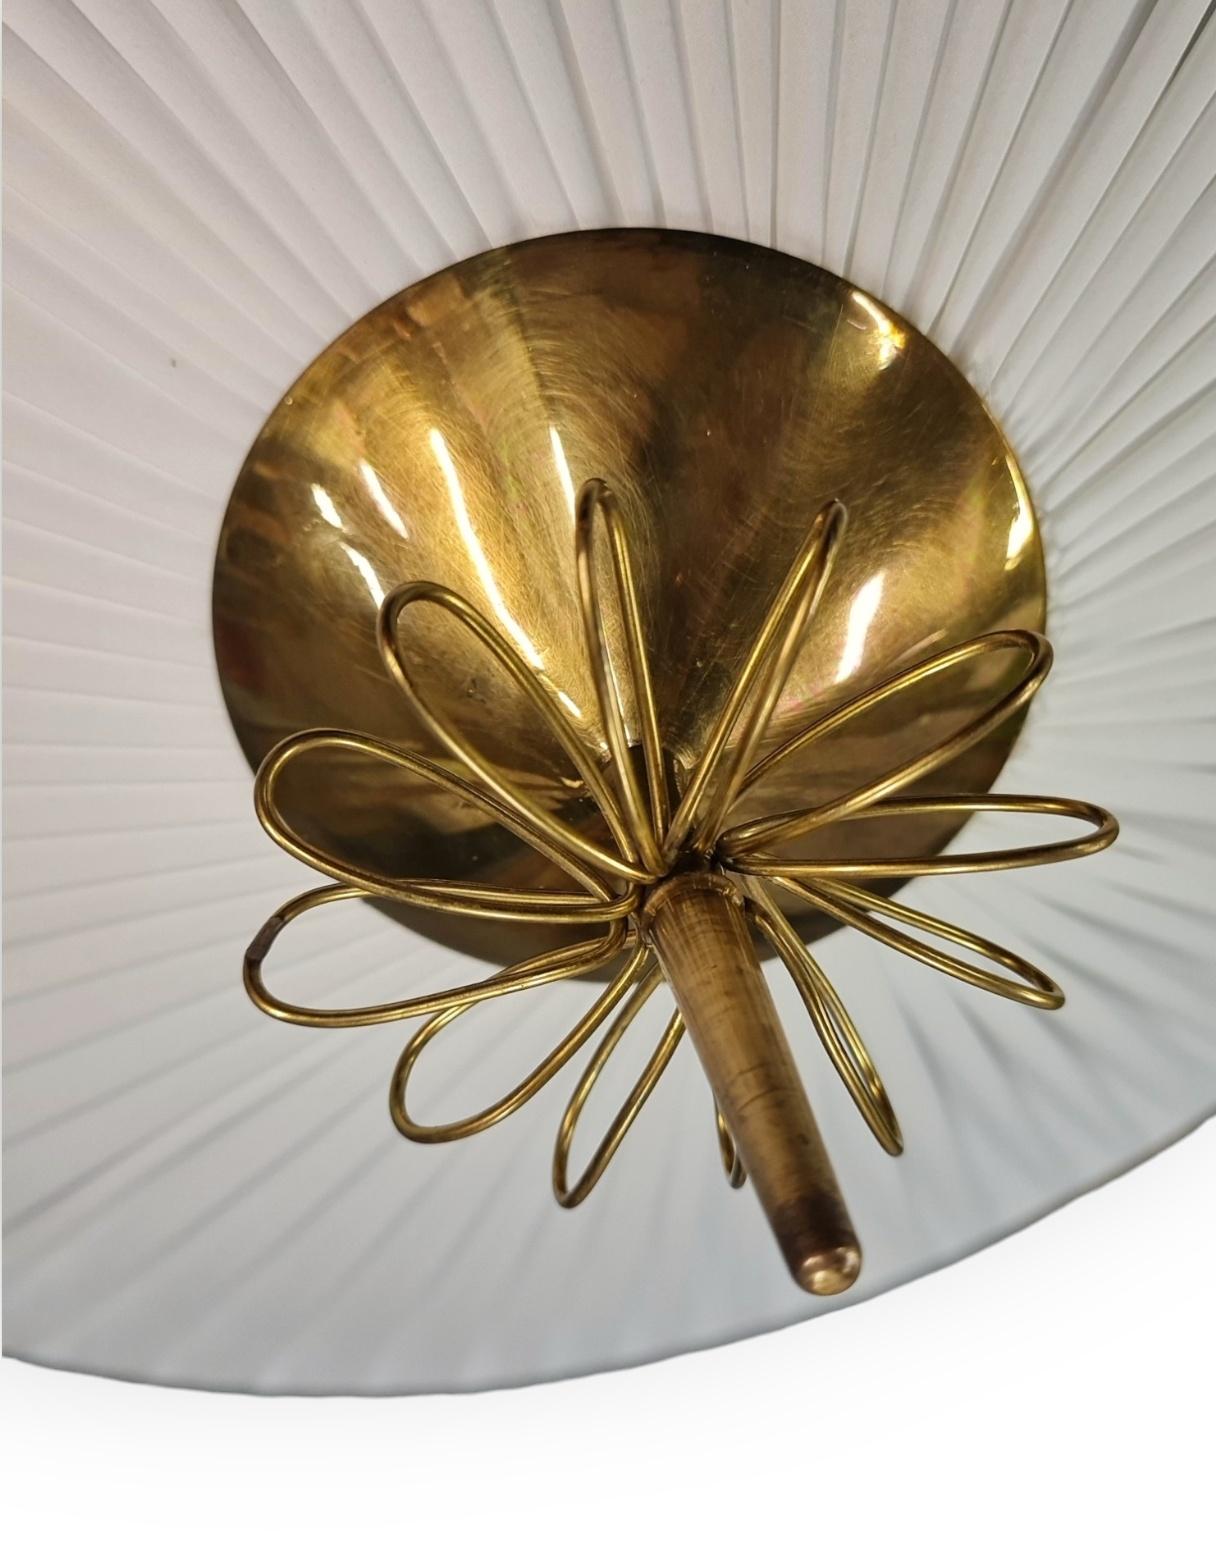 Monumental Paavo Tynell Commissioned Ceiling Lamp, In Brass and Fabric, Taito Oy For Sale 8